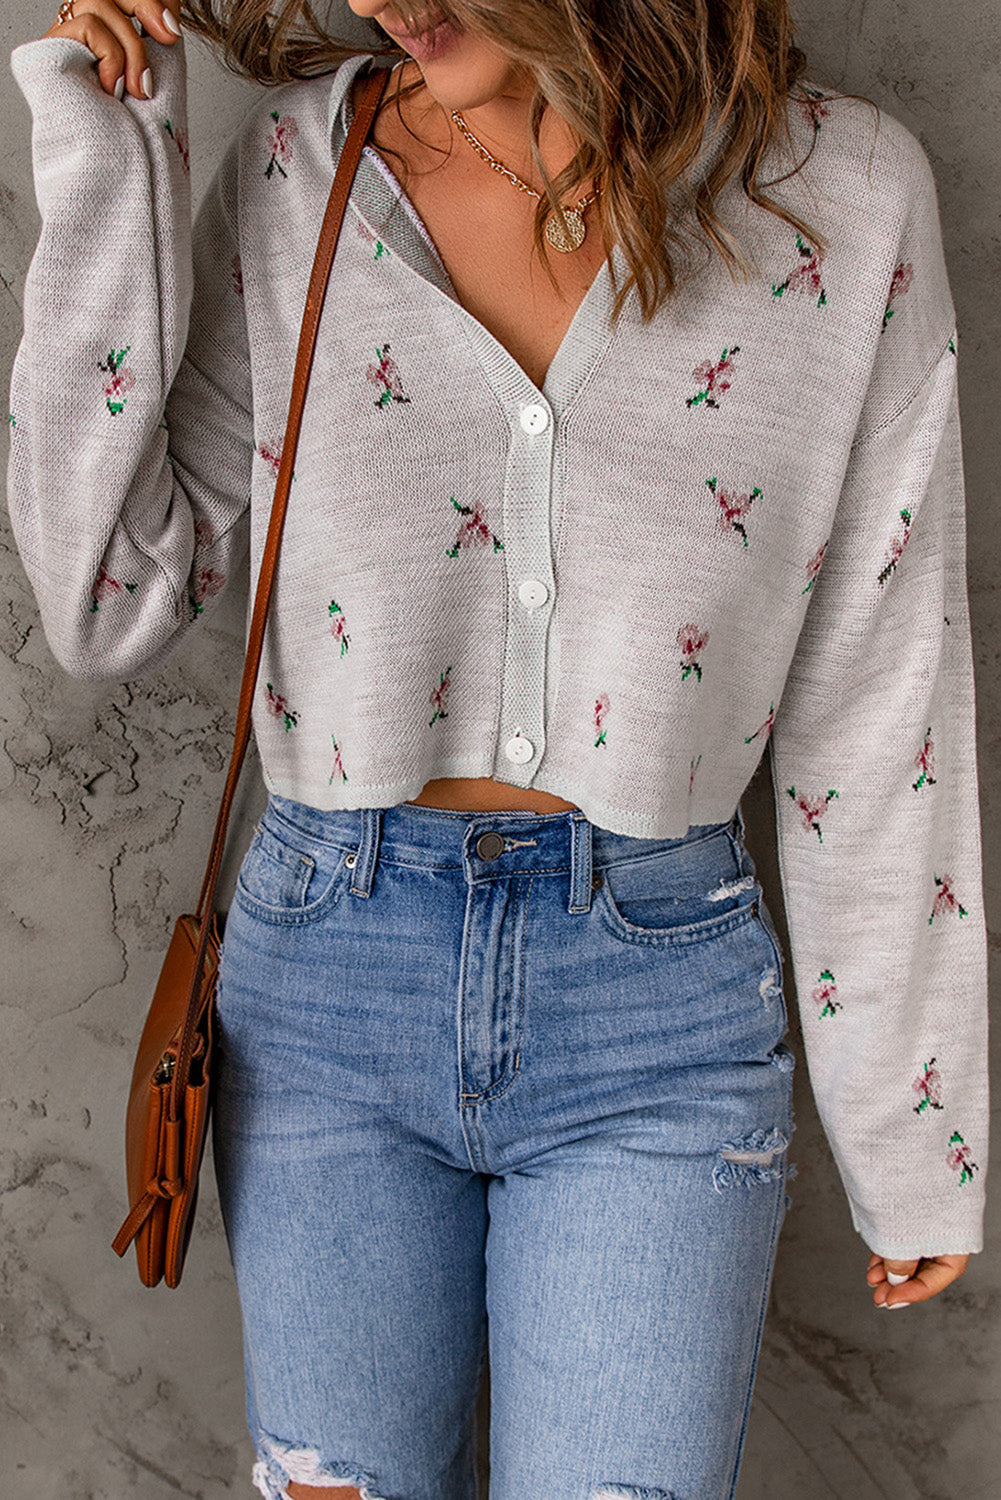 Floral Button Down Cropped Cardigan - Women’s Clothing & Accessories - Shirts & Tops - 5 - 2024